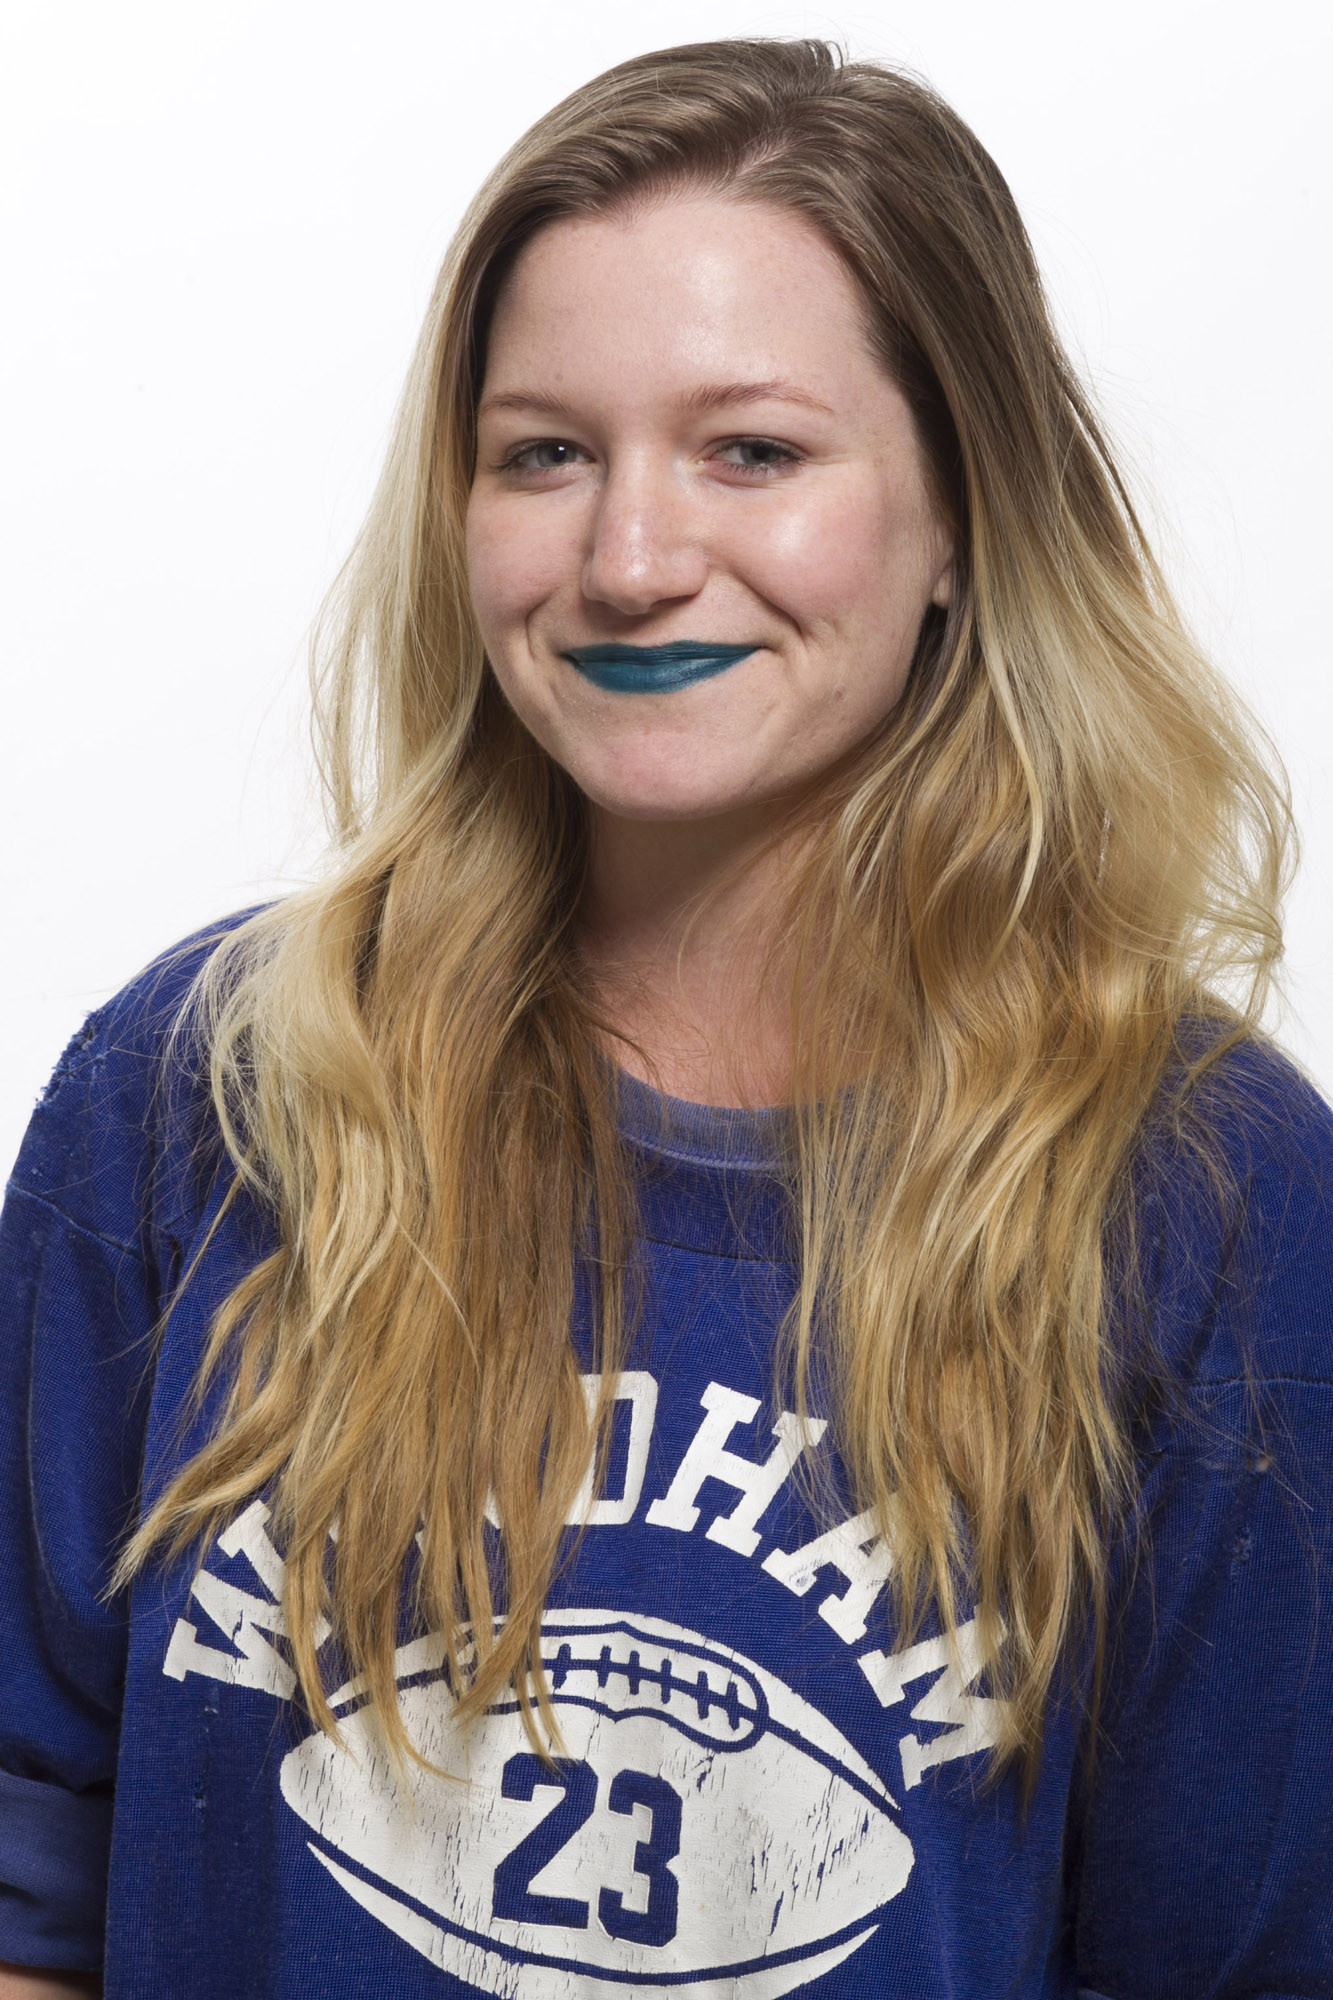 Here's what happens when you wear blue lipstick | New York Post